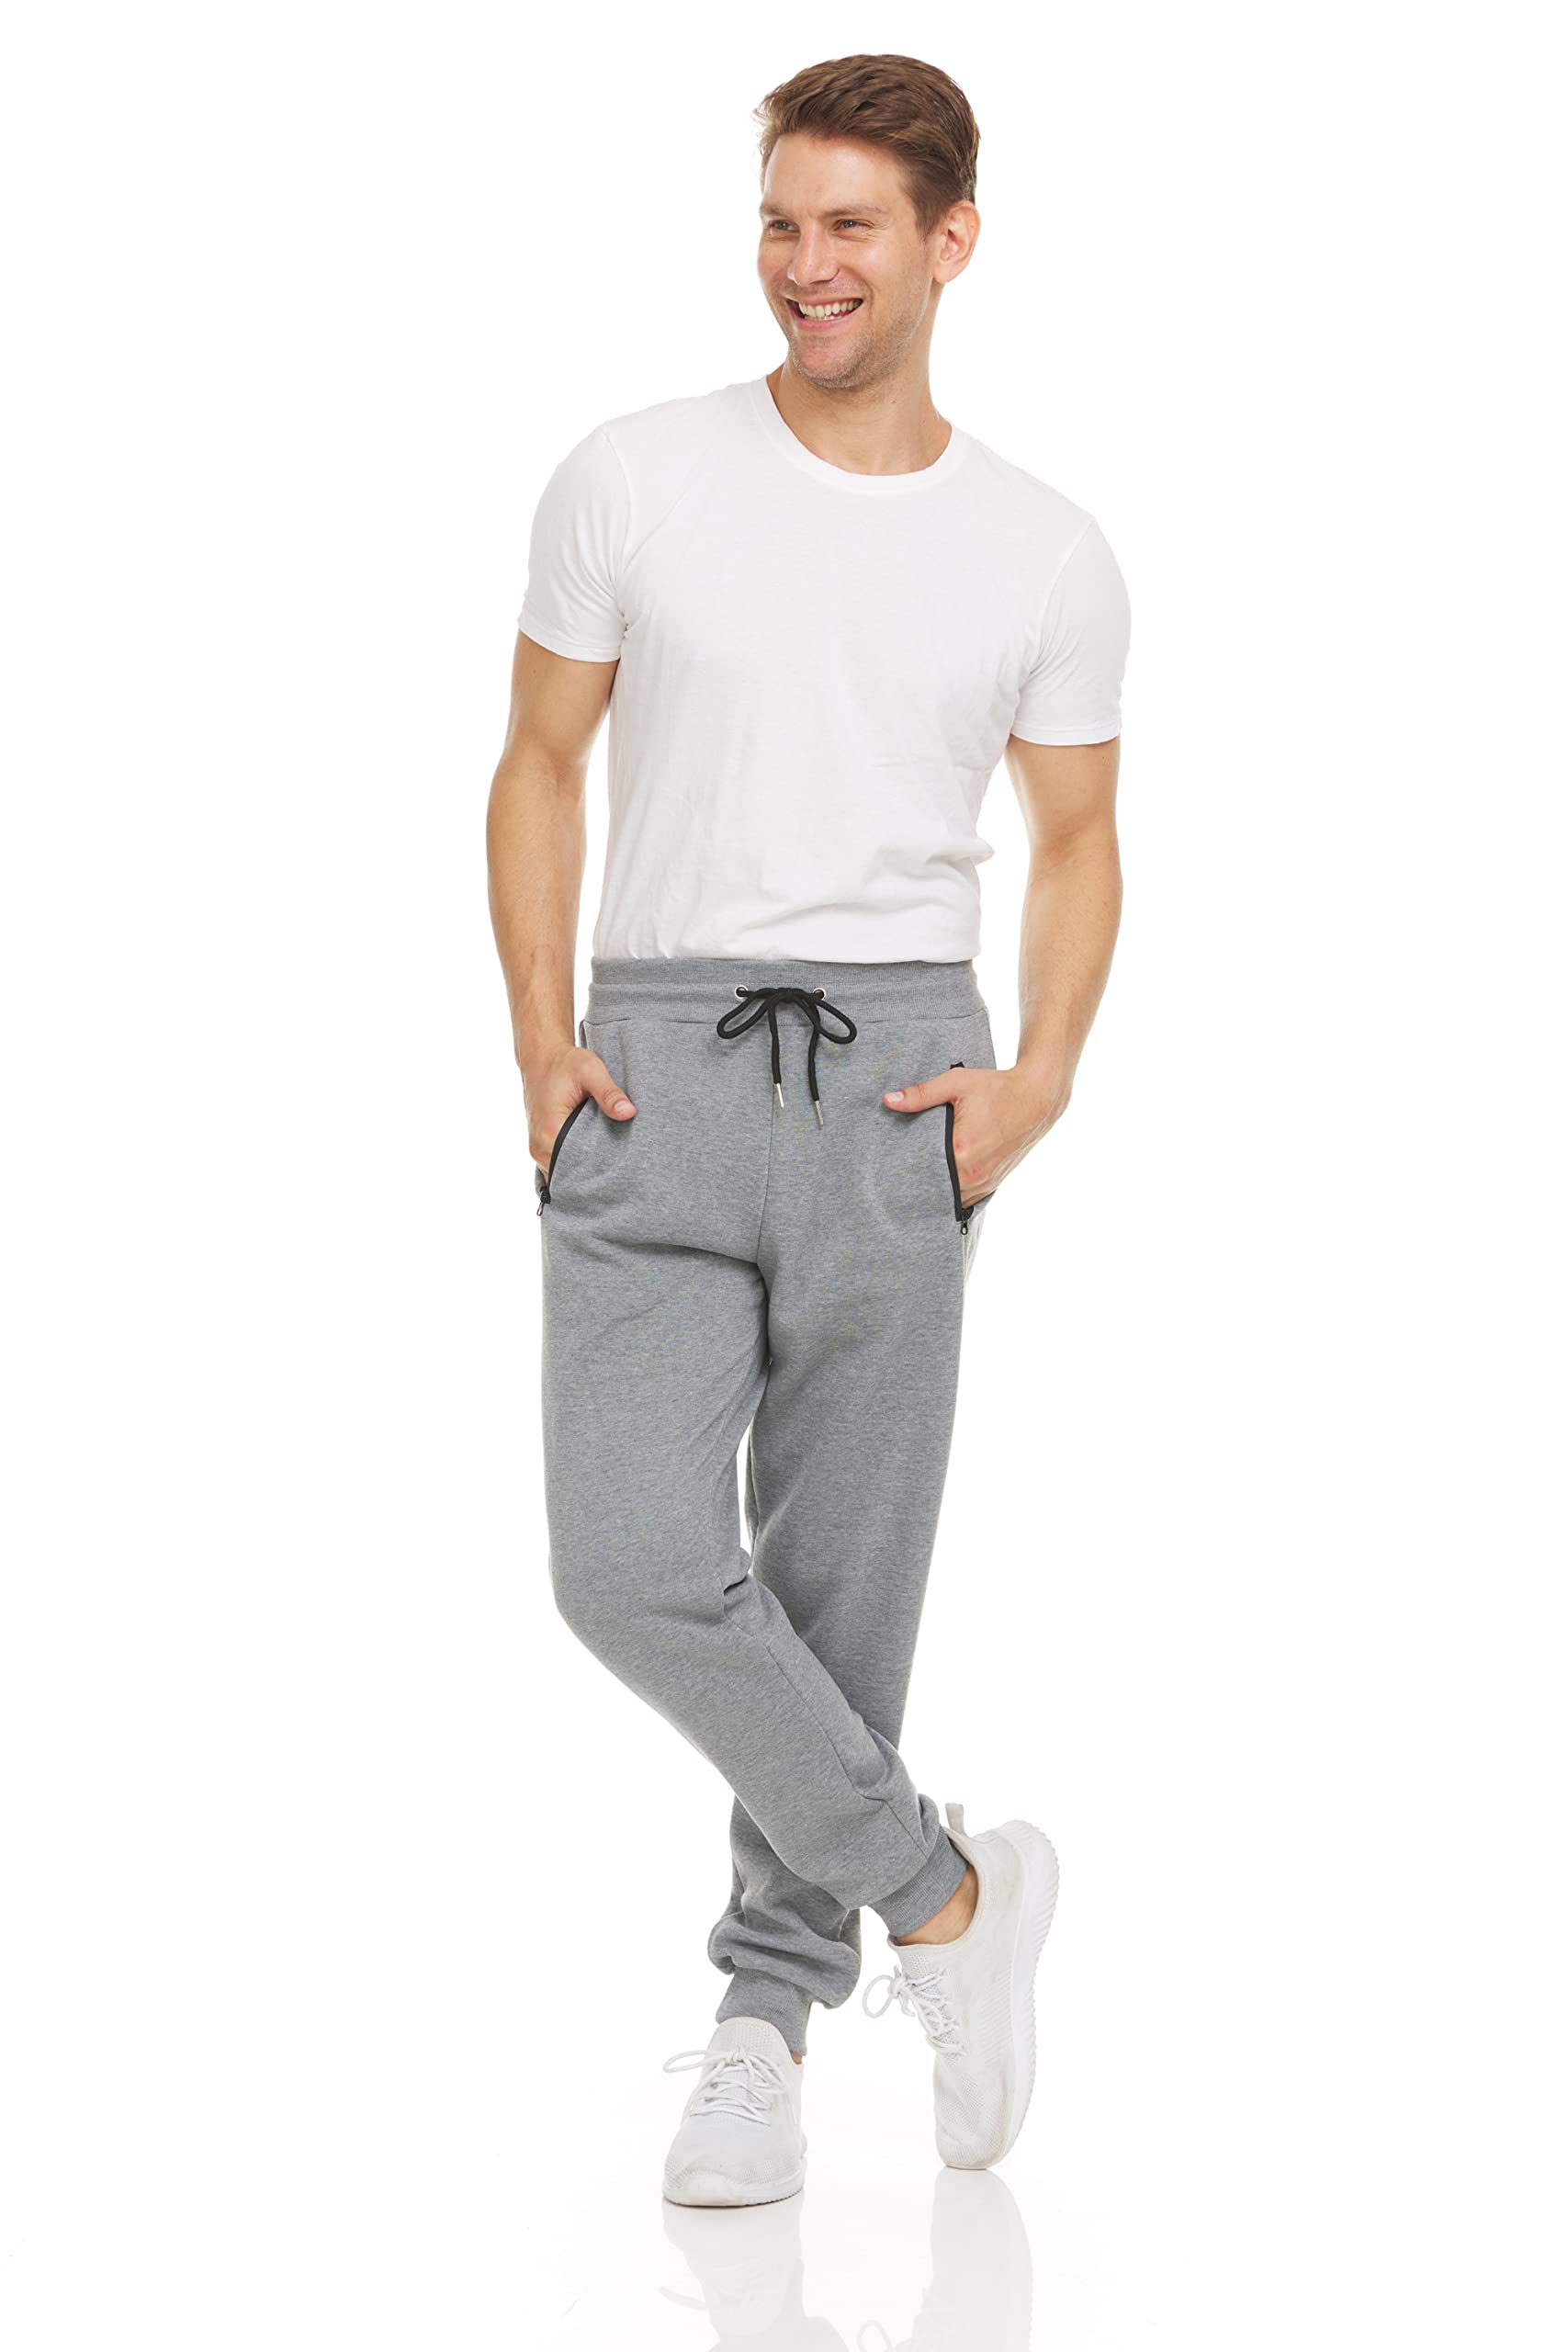 PURE CHAMP Mens 3 Pack Fleece Active Athletic Workout Jogger Sweatpants for Men with Zipper Pocket and Drawstring Size S-3XL(X-Large, Set 1)